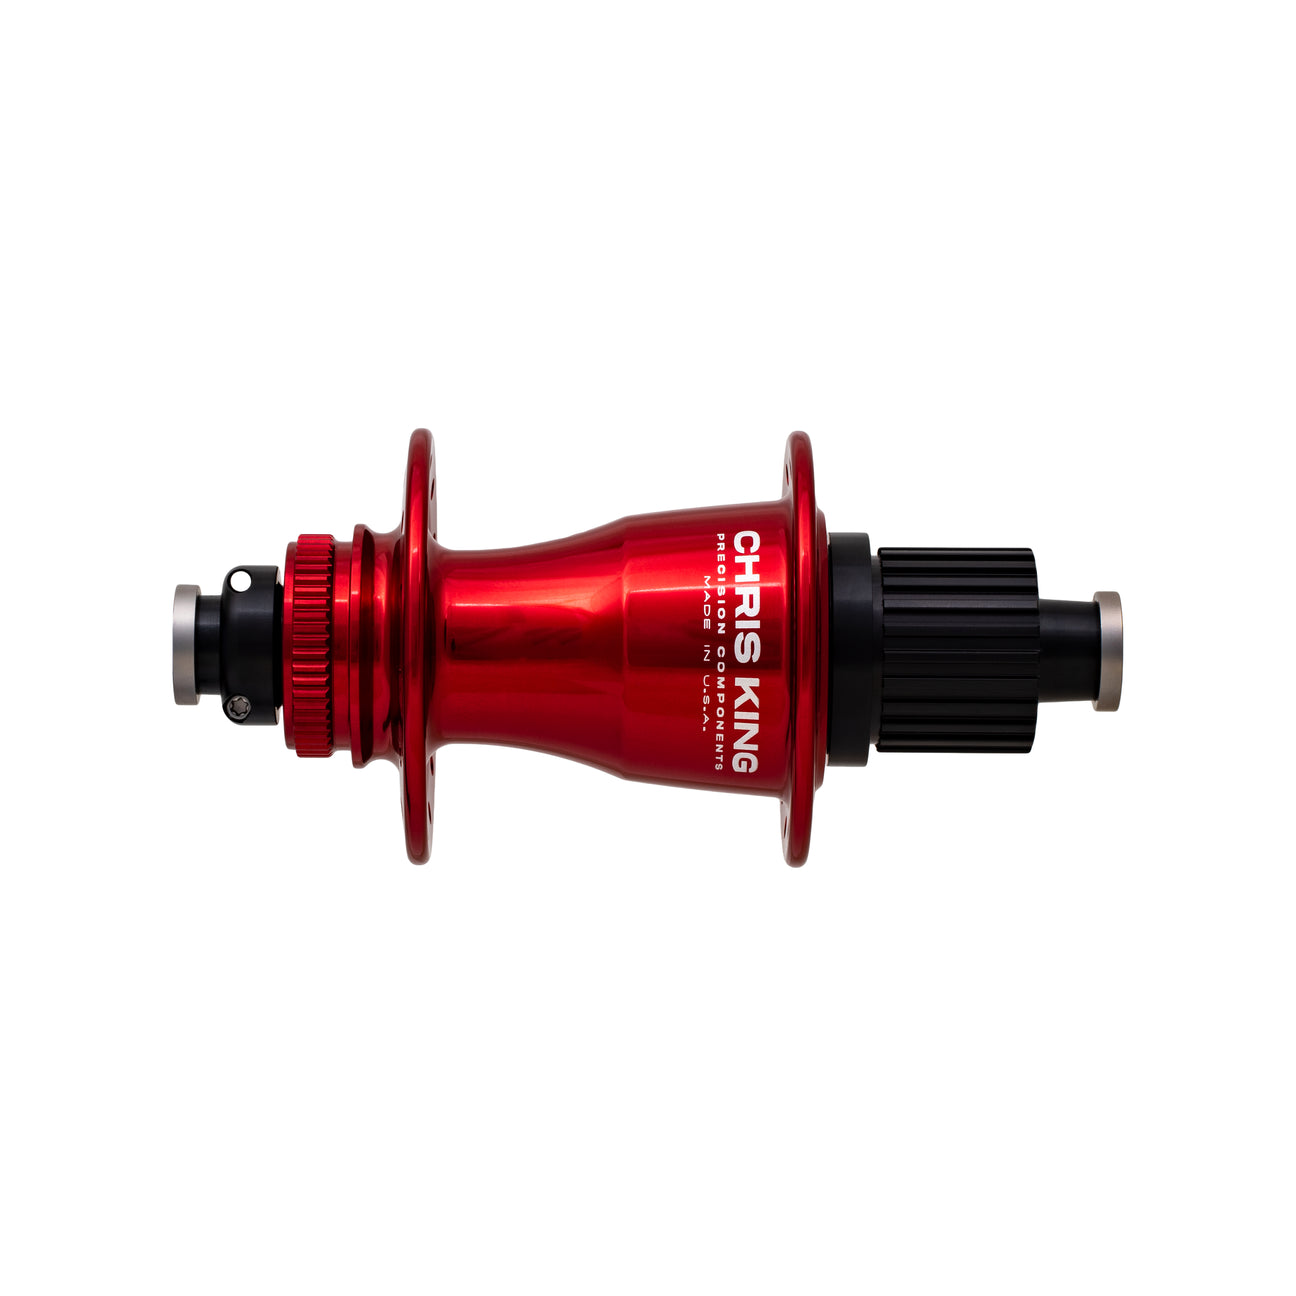 Chris king boost CL rear hub in red